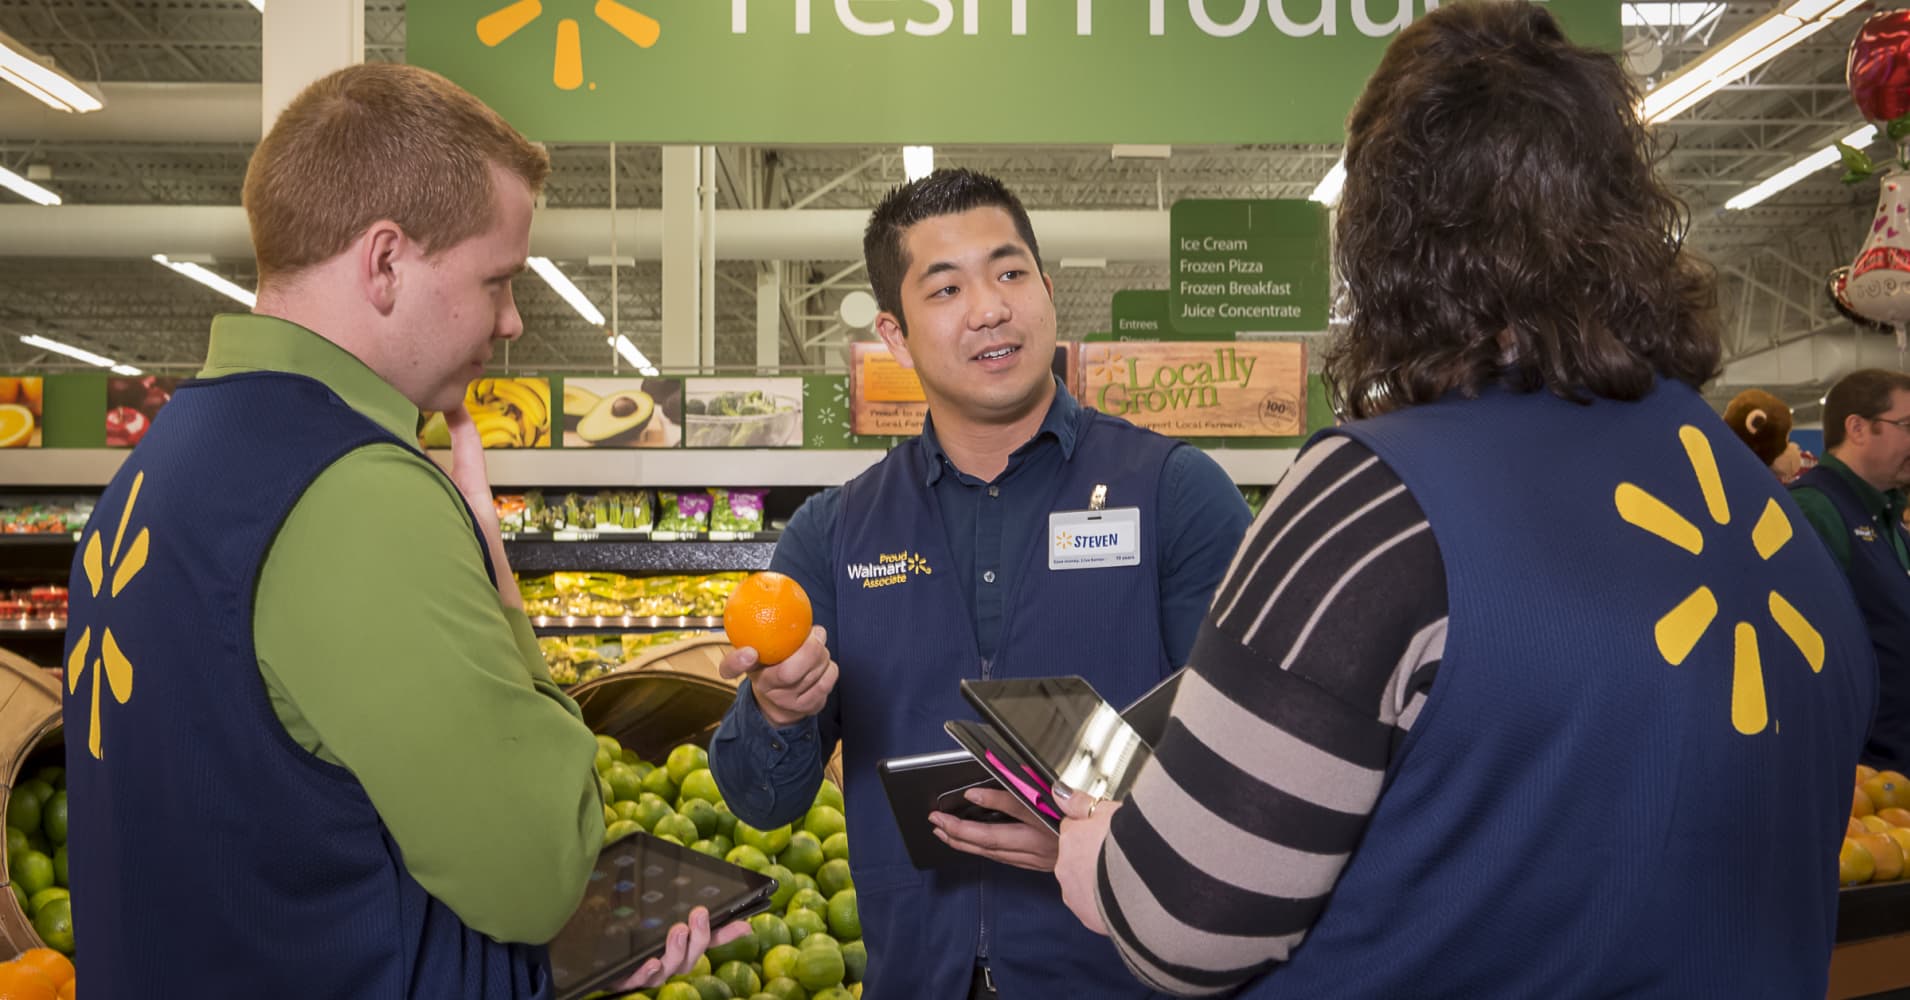 WalMart ups entrylevel manager salaries ahead of overtime rule